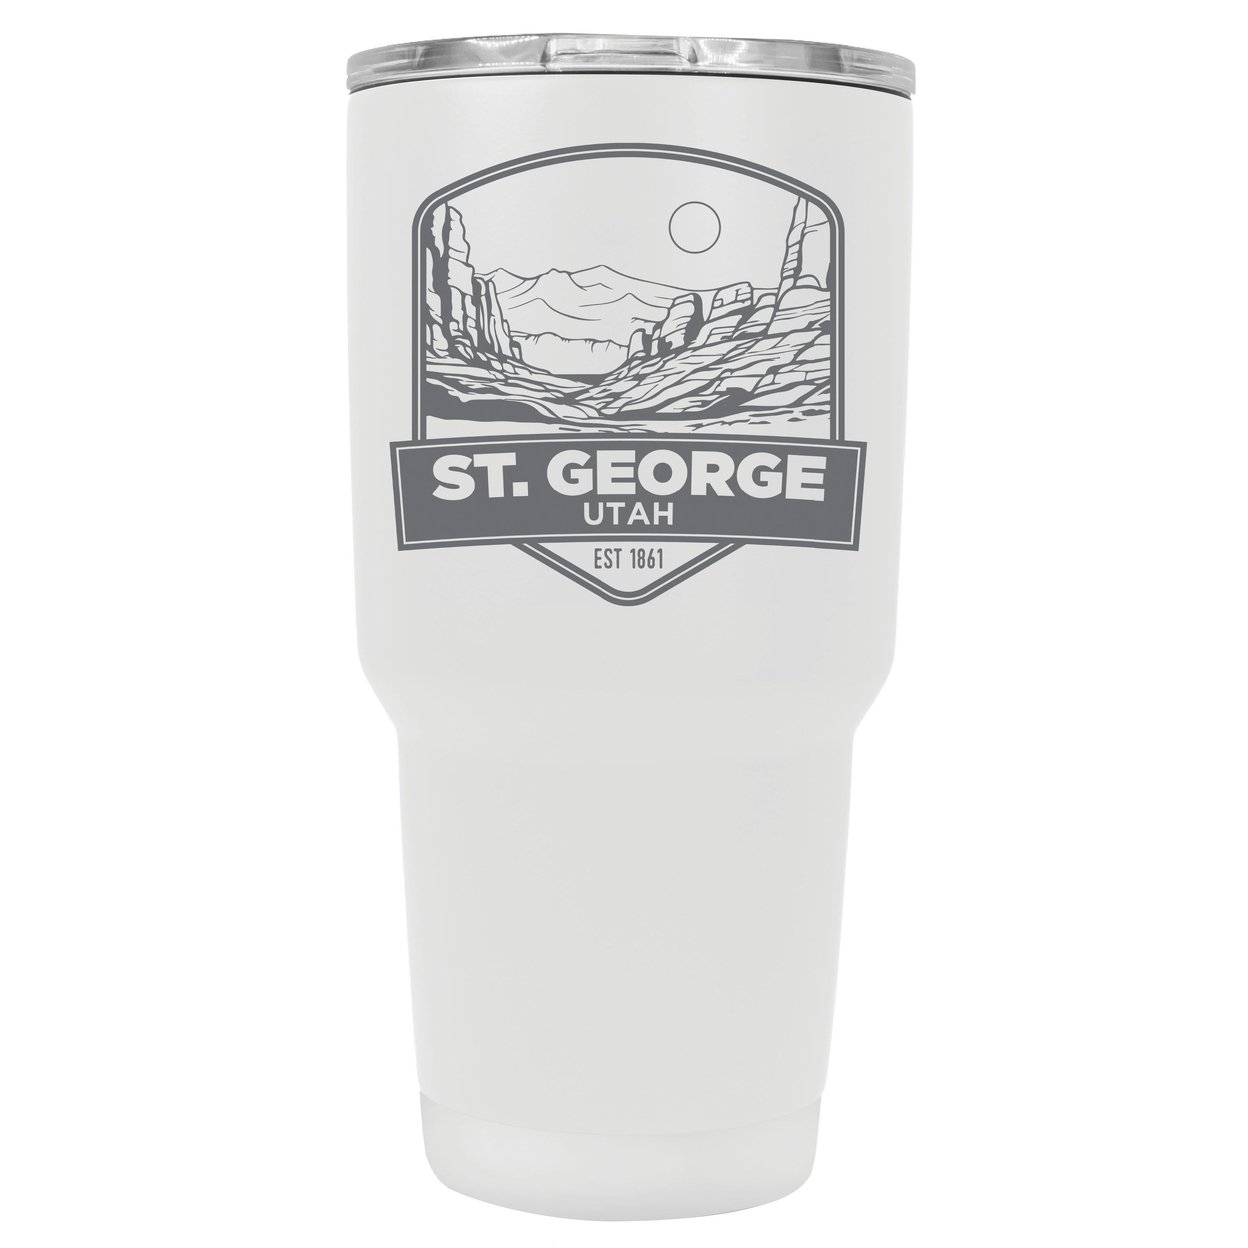 St. George Utah Souvenir 24 Oz Engraved Insulated Stainless Steel Tumbler - Rose Gold,,2-Pack